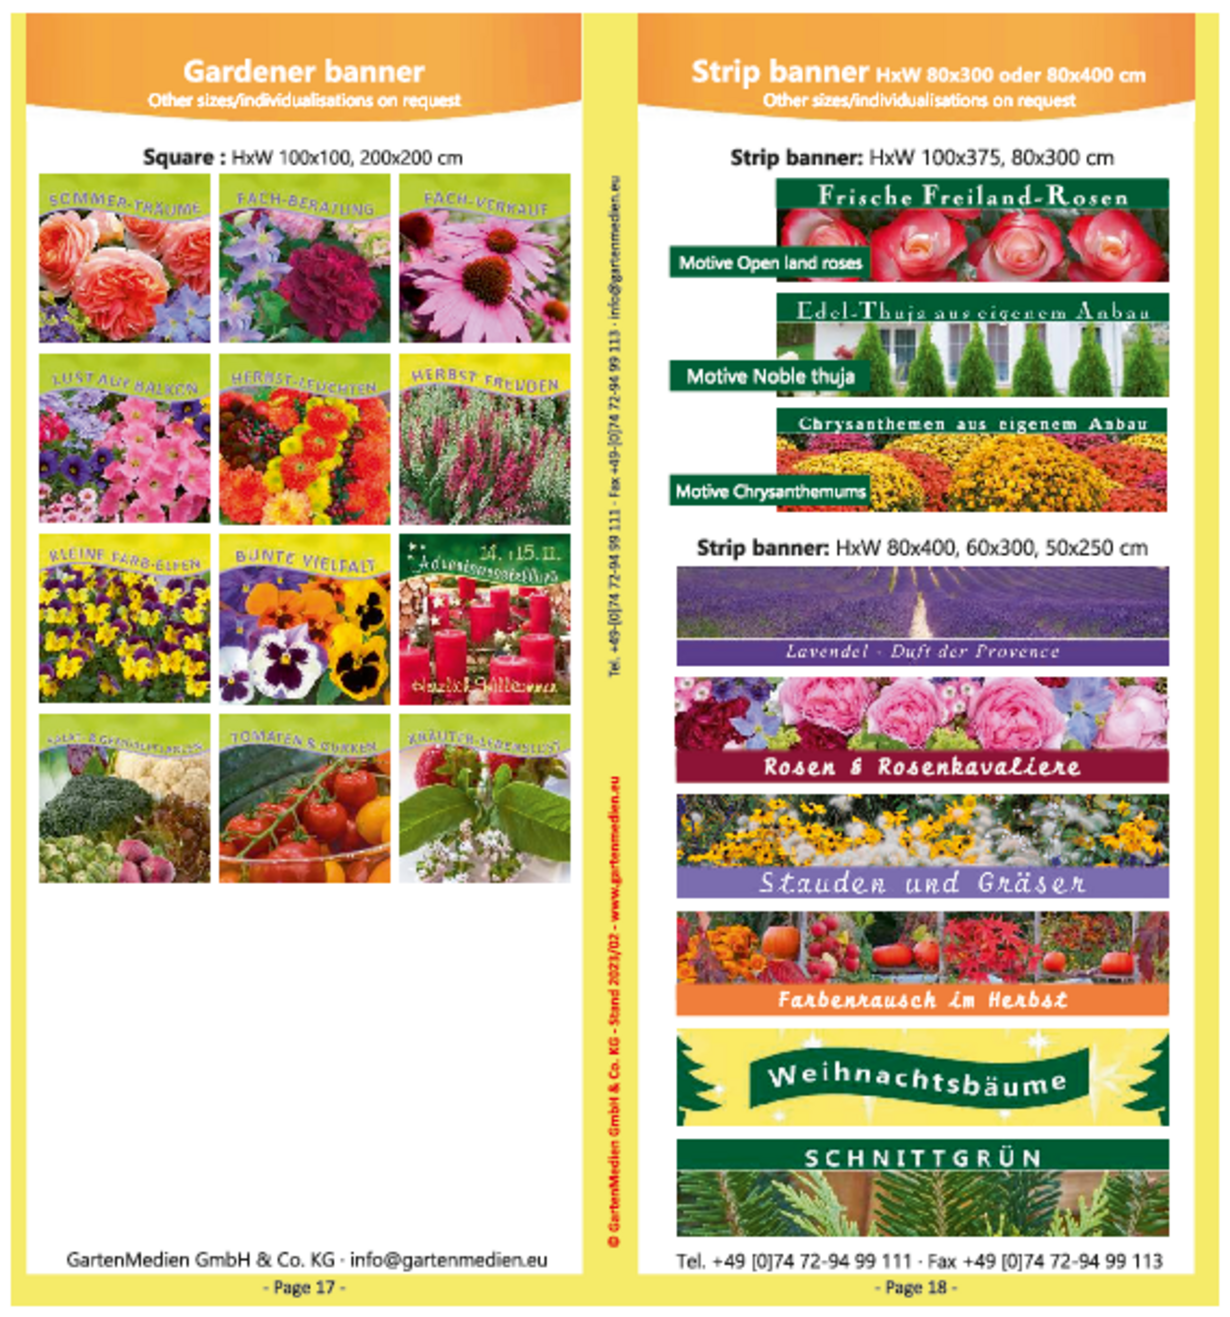 Horticulturist banners and stripe banners